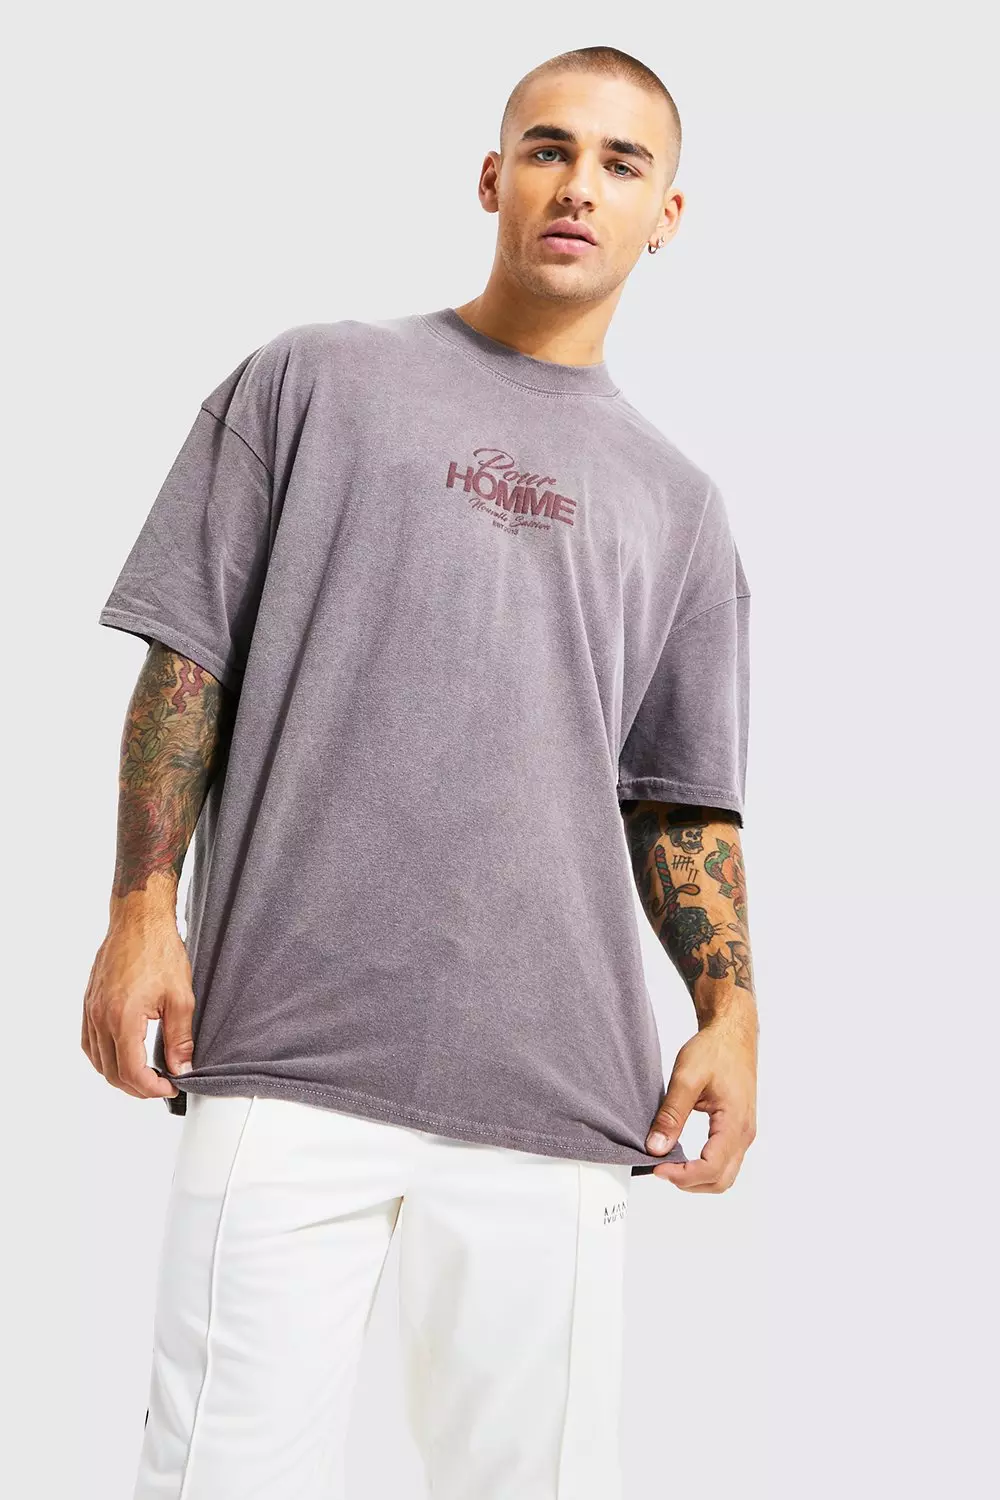 Chocolate Brown Oversized Pour Homme Tonal Print T-shirt